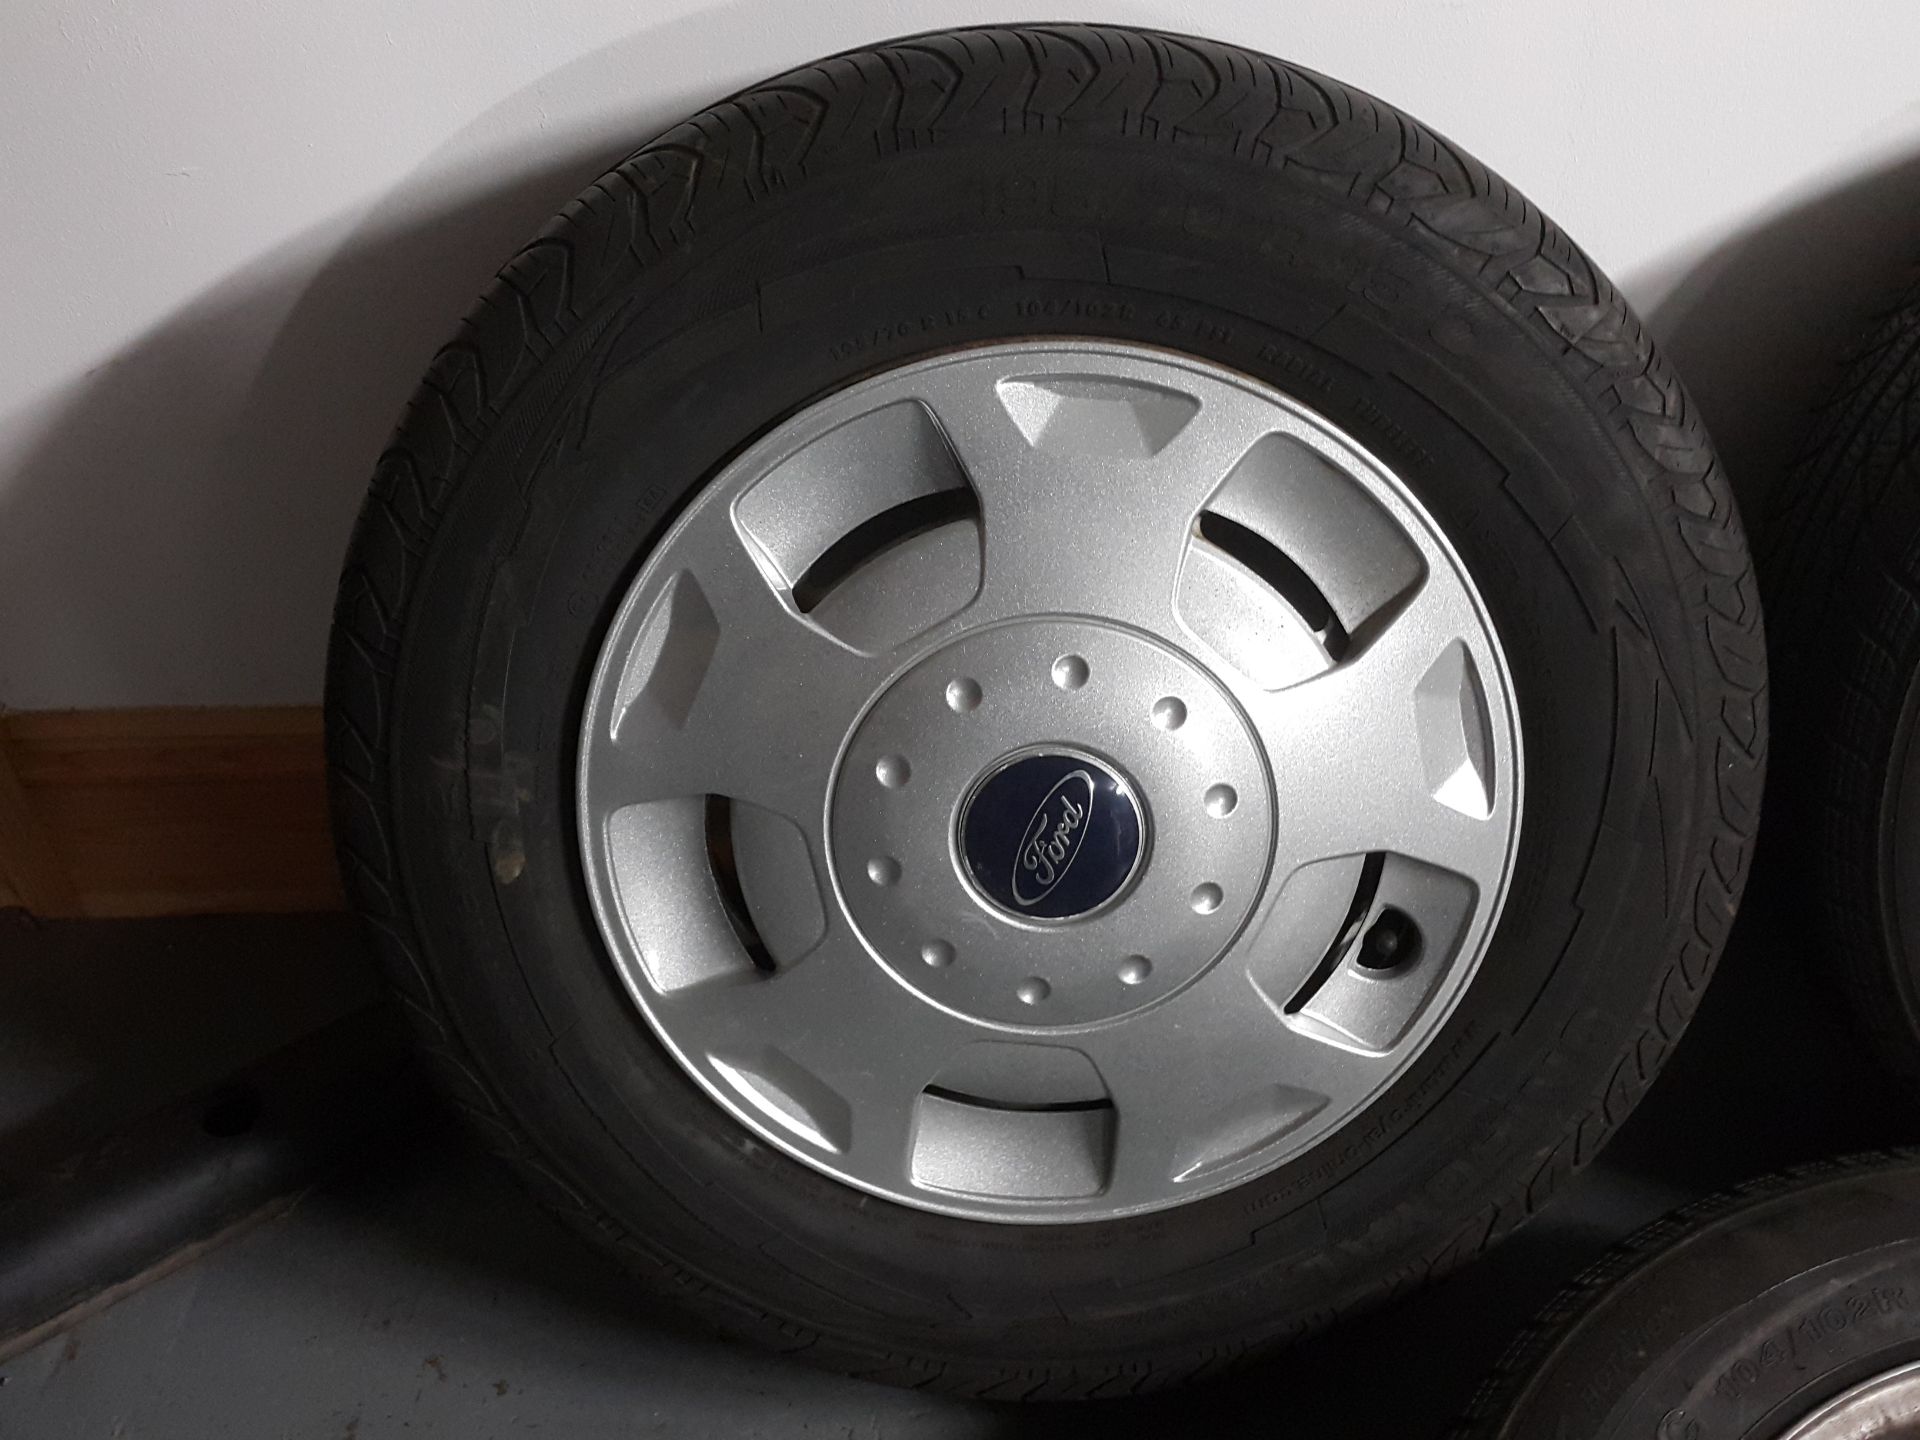 4 X FORD TRANSIT 15" STEEL RIMS WITH TYRES 195/70/R15 (2 UNIROYAL 2 OTHERS) - Bild 2 aus 9